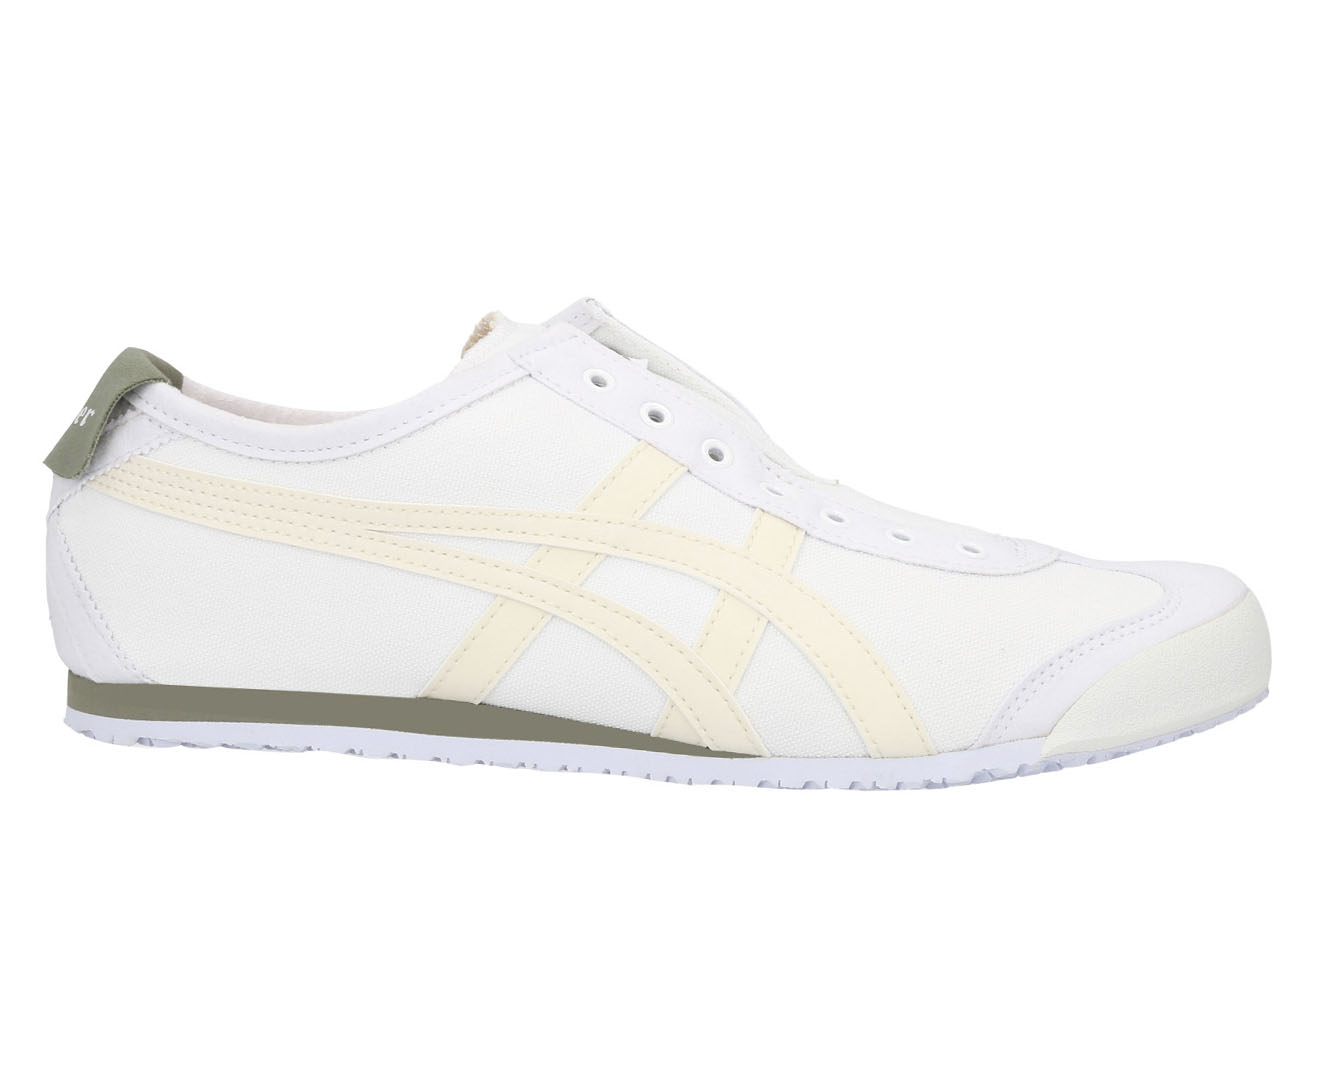 Onitsuka Tiger Men's Mexico 66 Slip-On Sneakers - White/Birch | Catch.co.nz